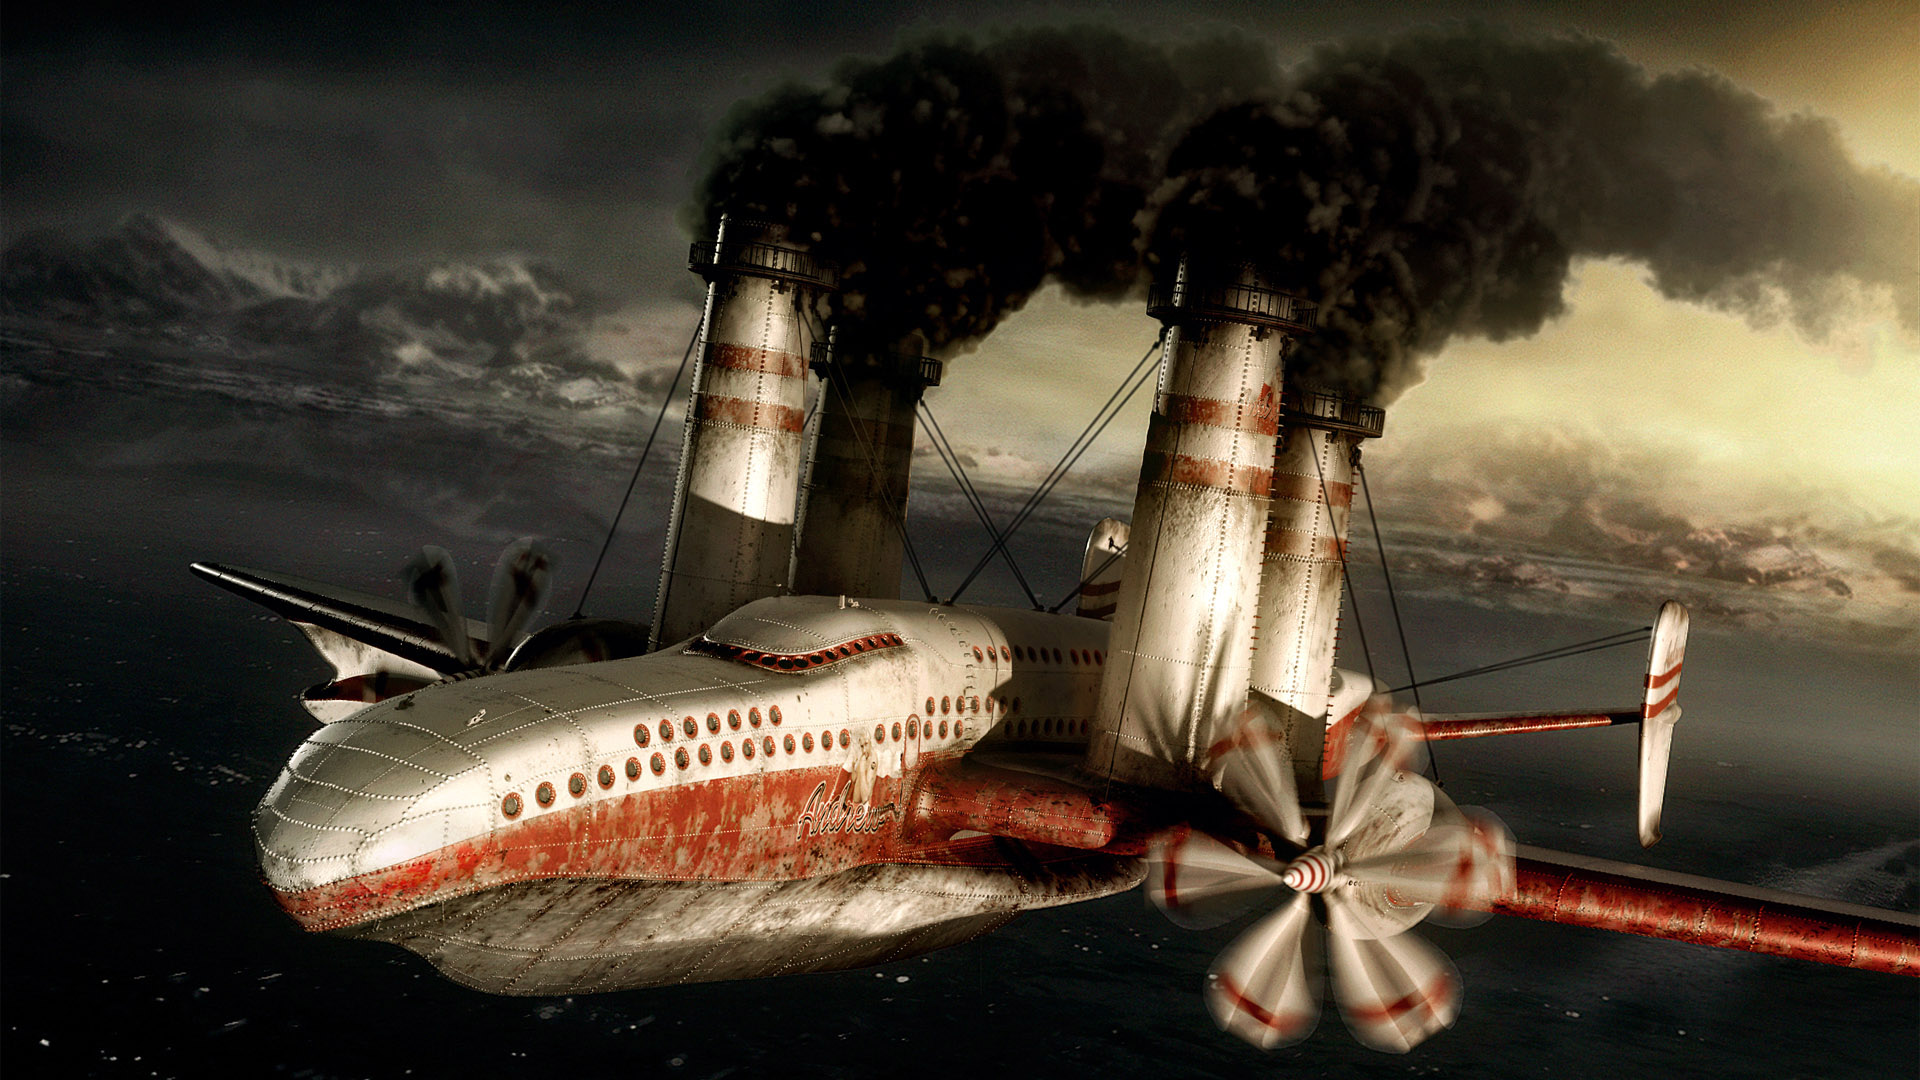 Previous, Fantasy - The plane with the steam engine wallpaper